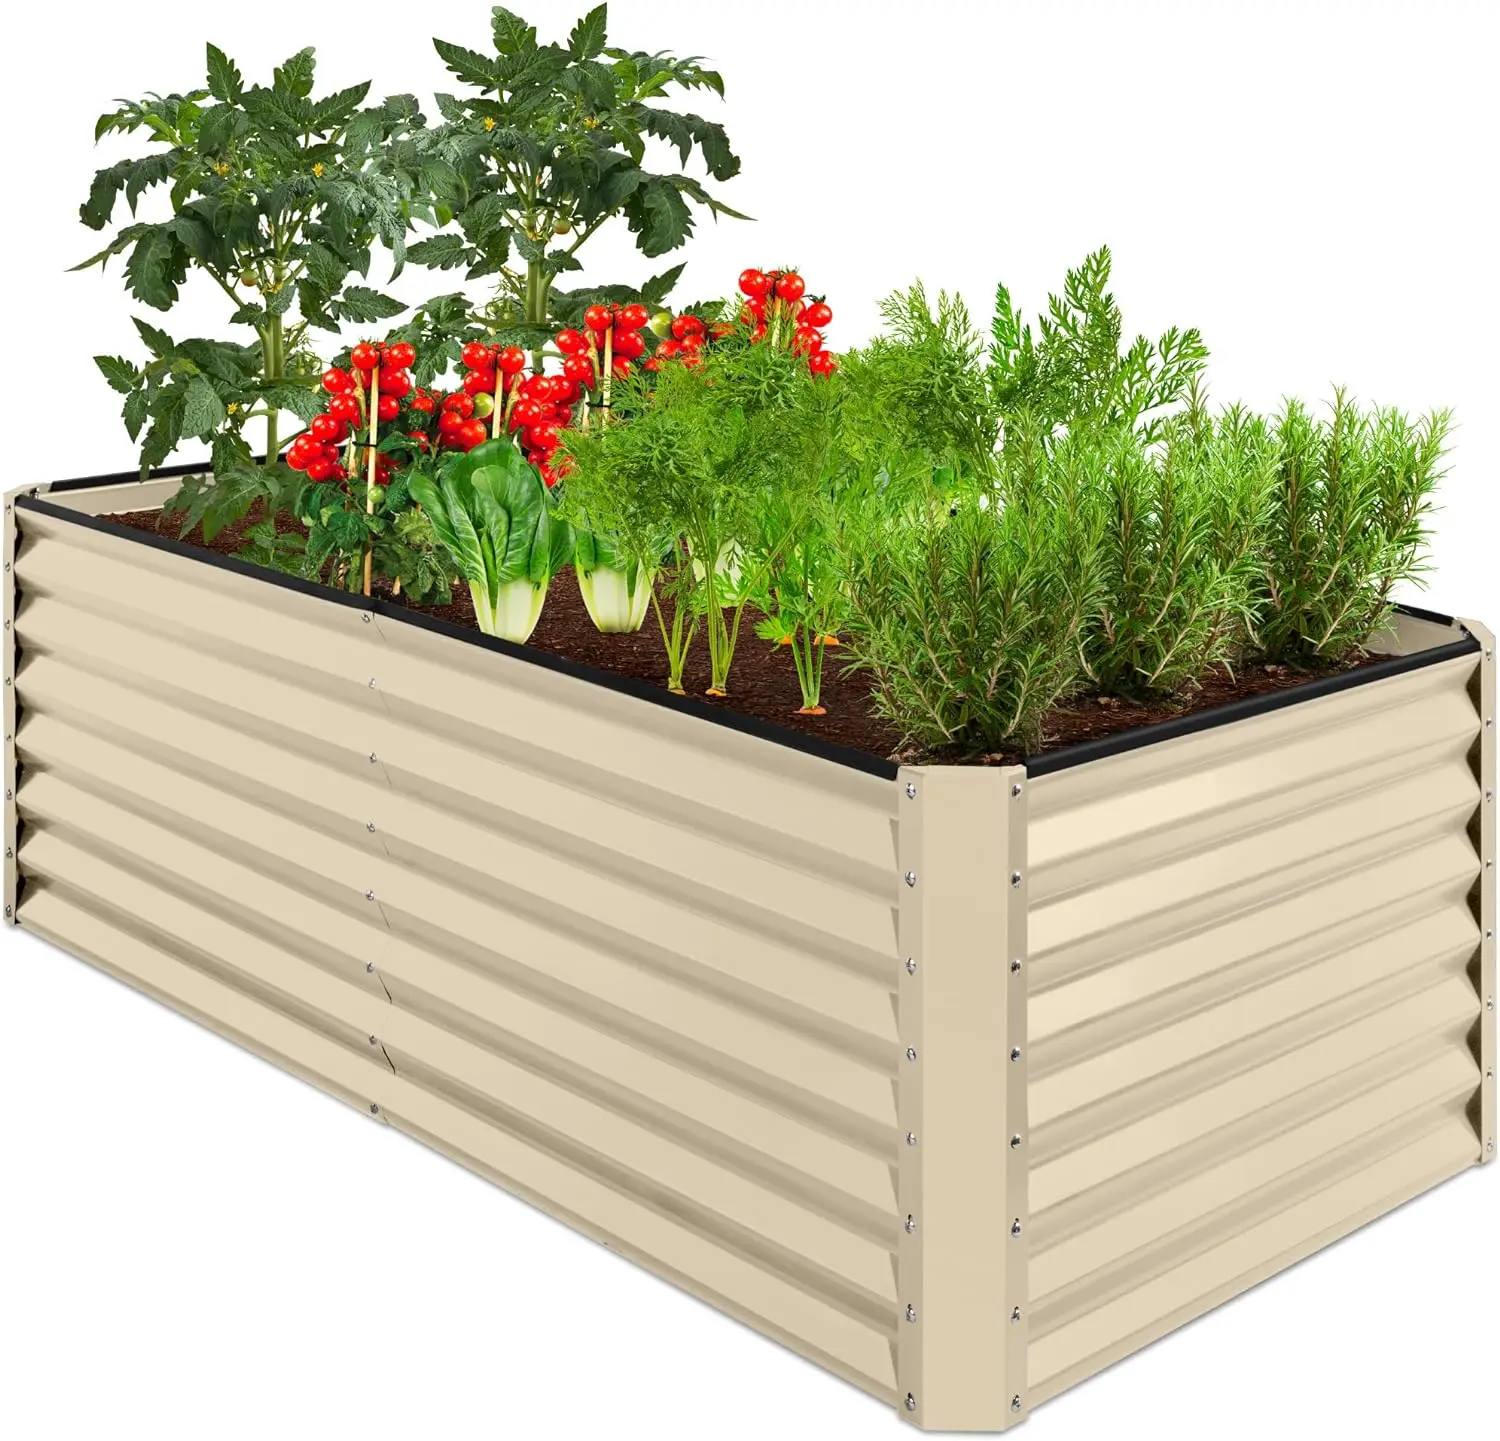 

s 6x3x2ft Outdoor Metal Raised Garden Bed, Deep Root Box Planter for Vegetables, Flowers, Herbs, and Succulents w/ 269 Gallon